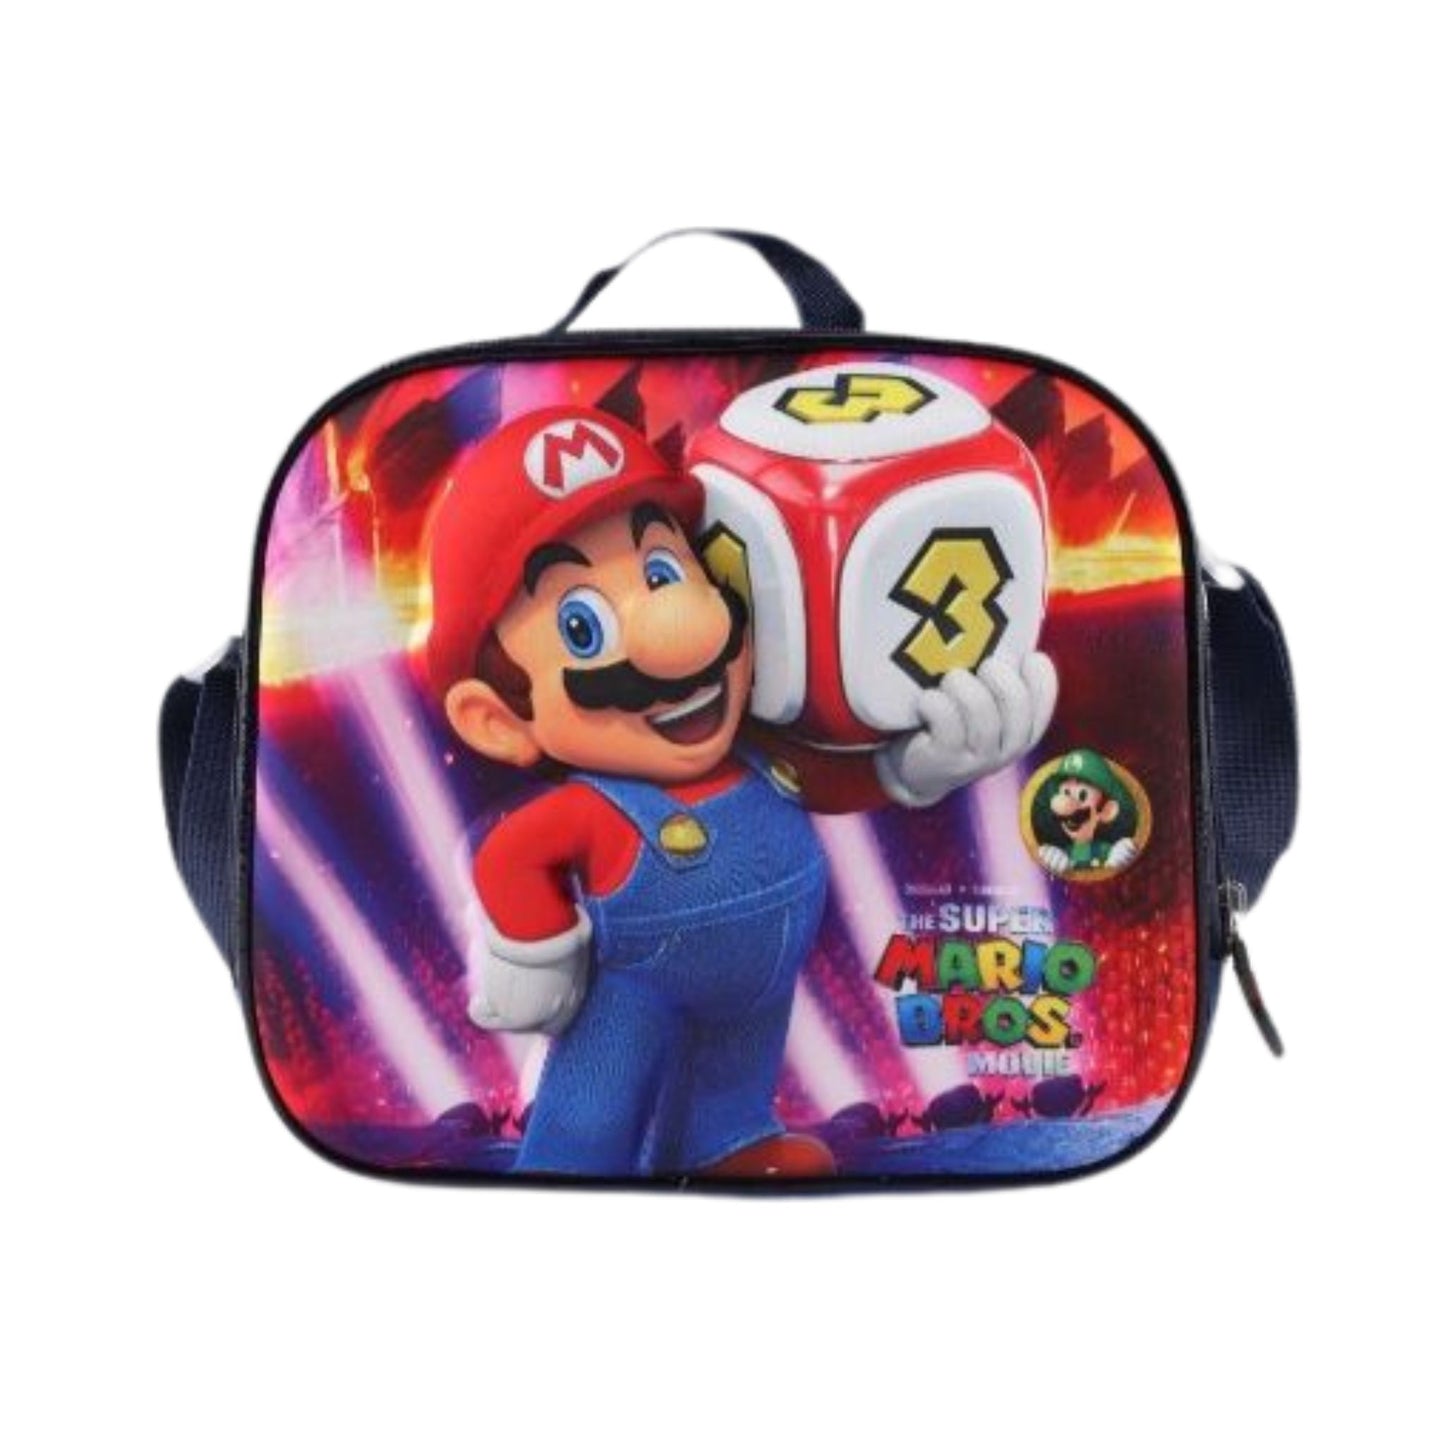 G242 Mario Bros Insulated Lunch Bags